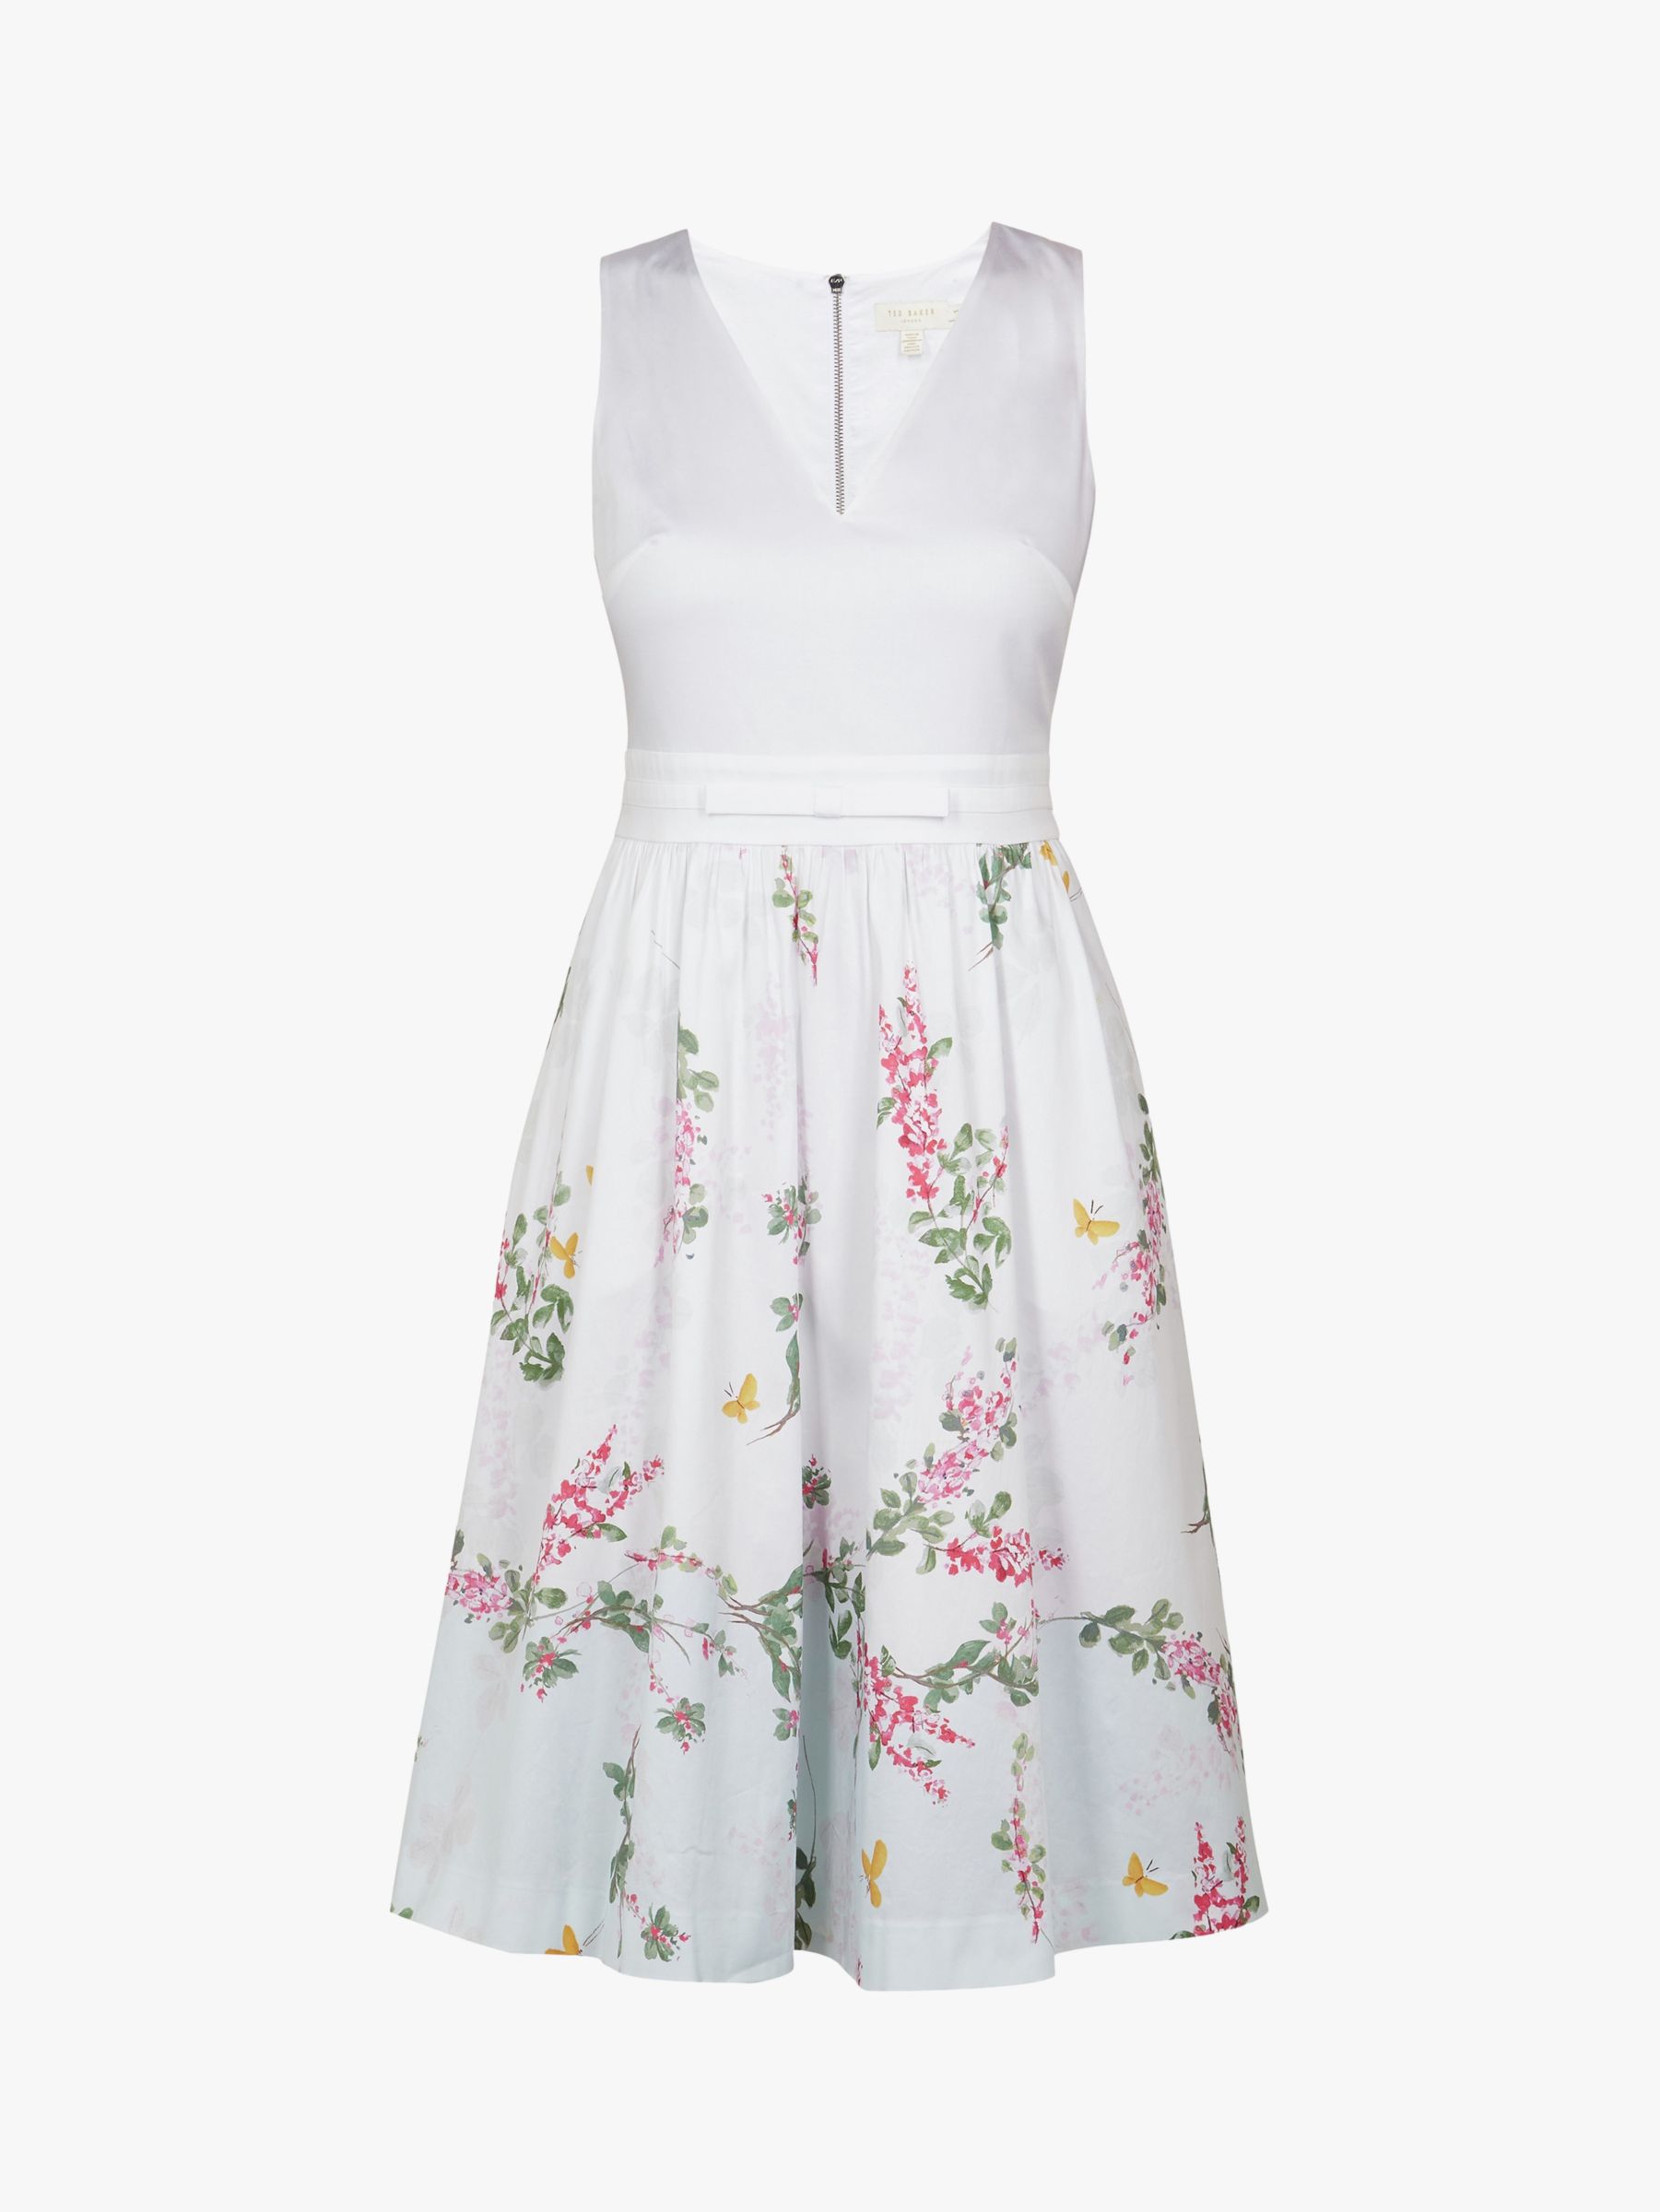 ted baker pink and white dress